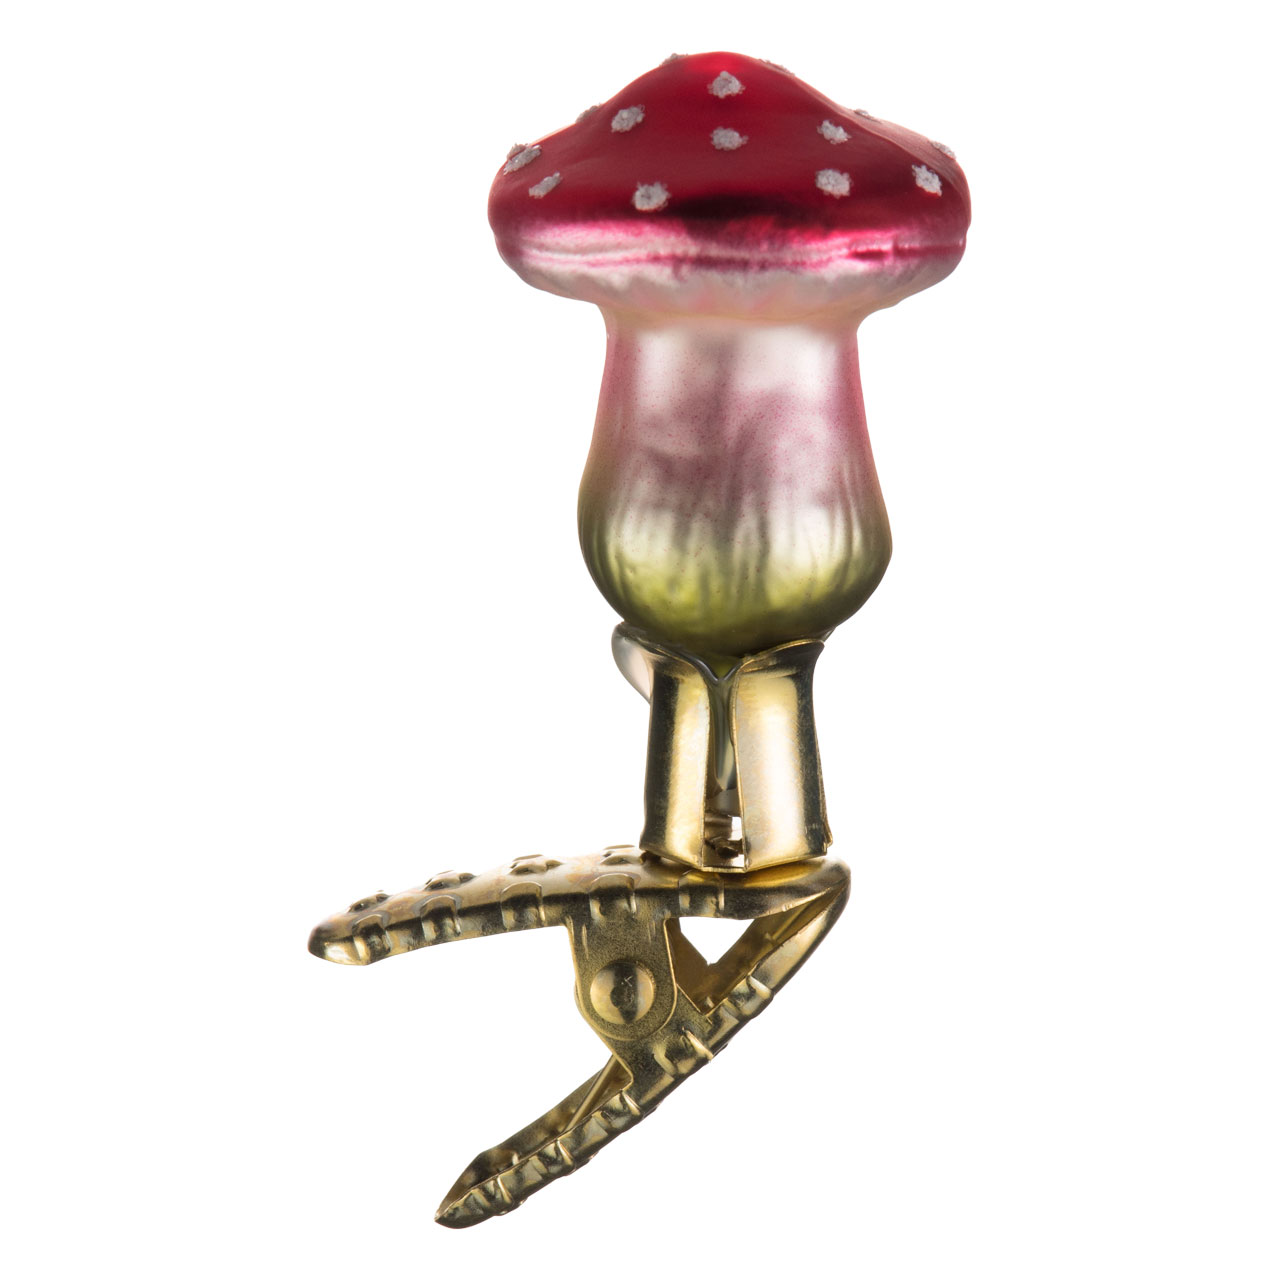 Small fly agaric